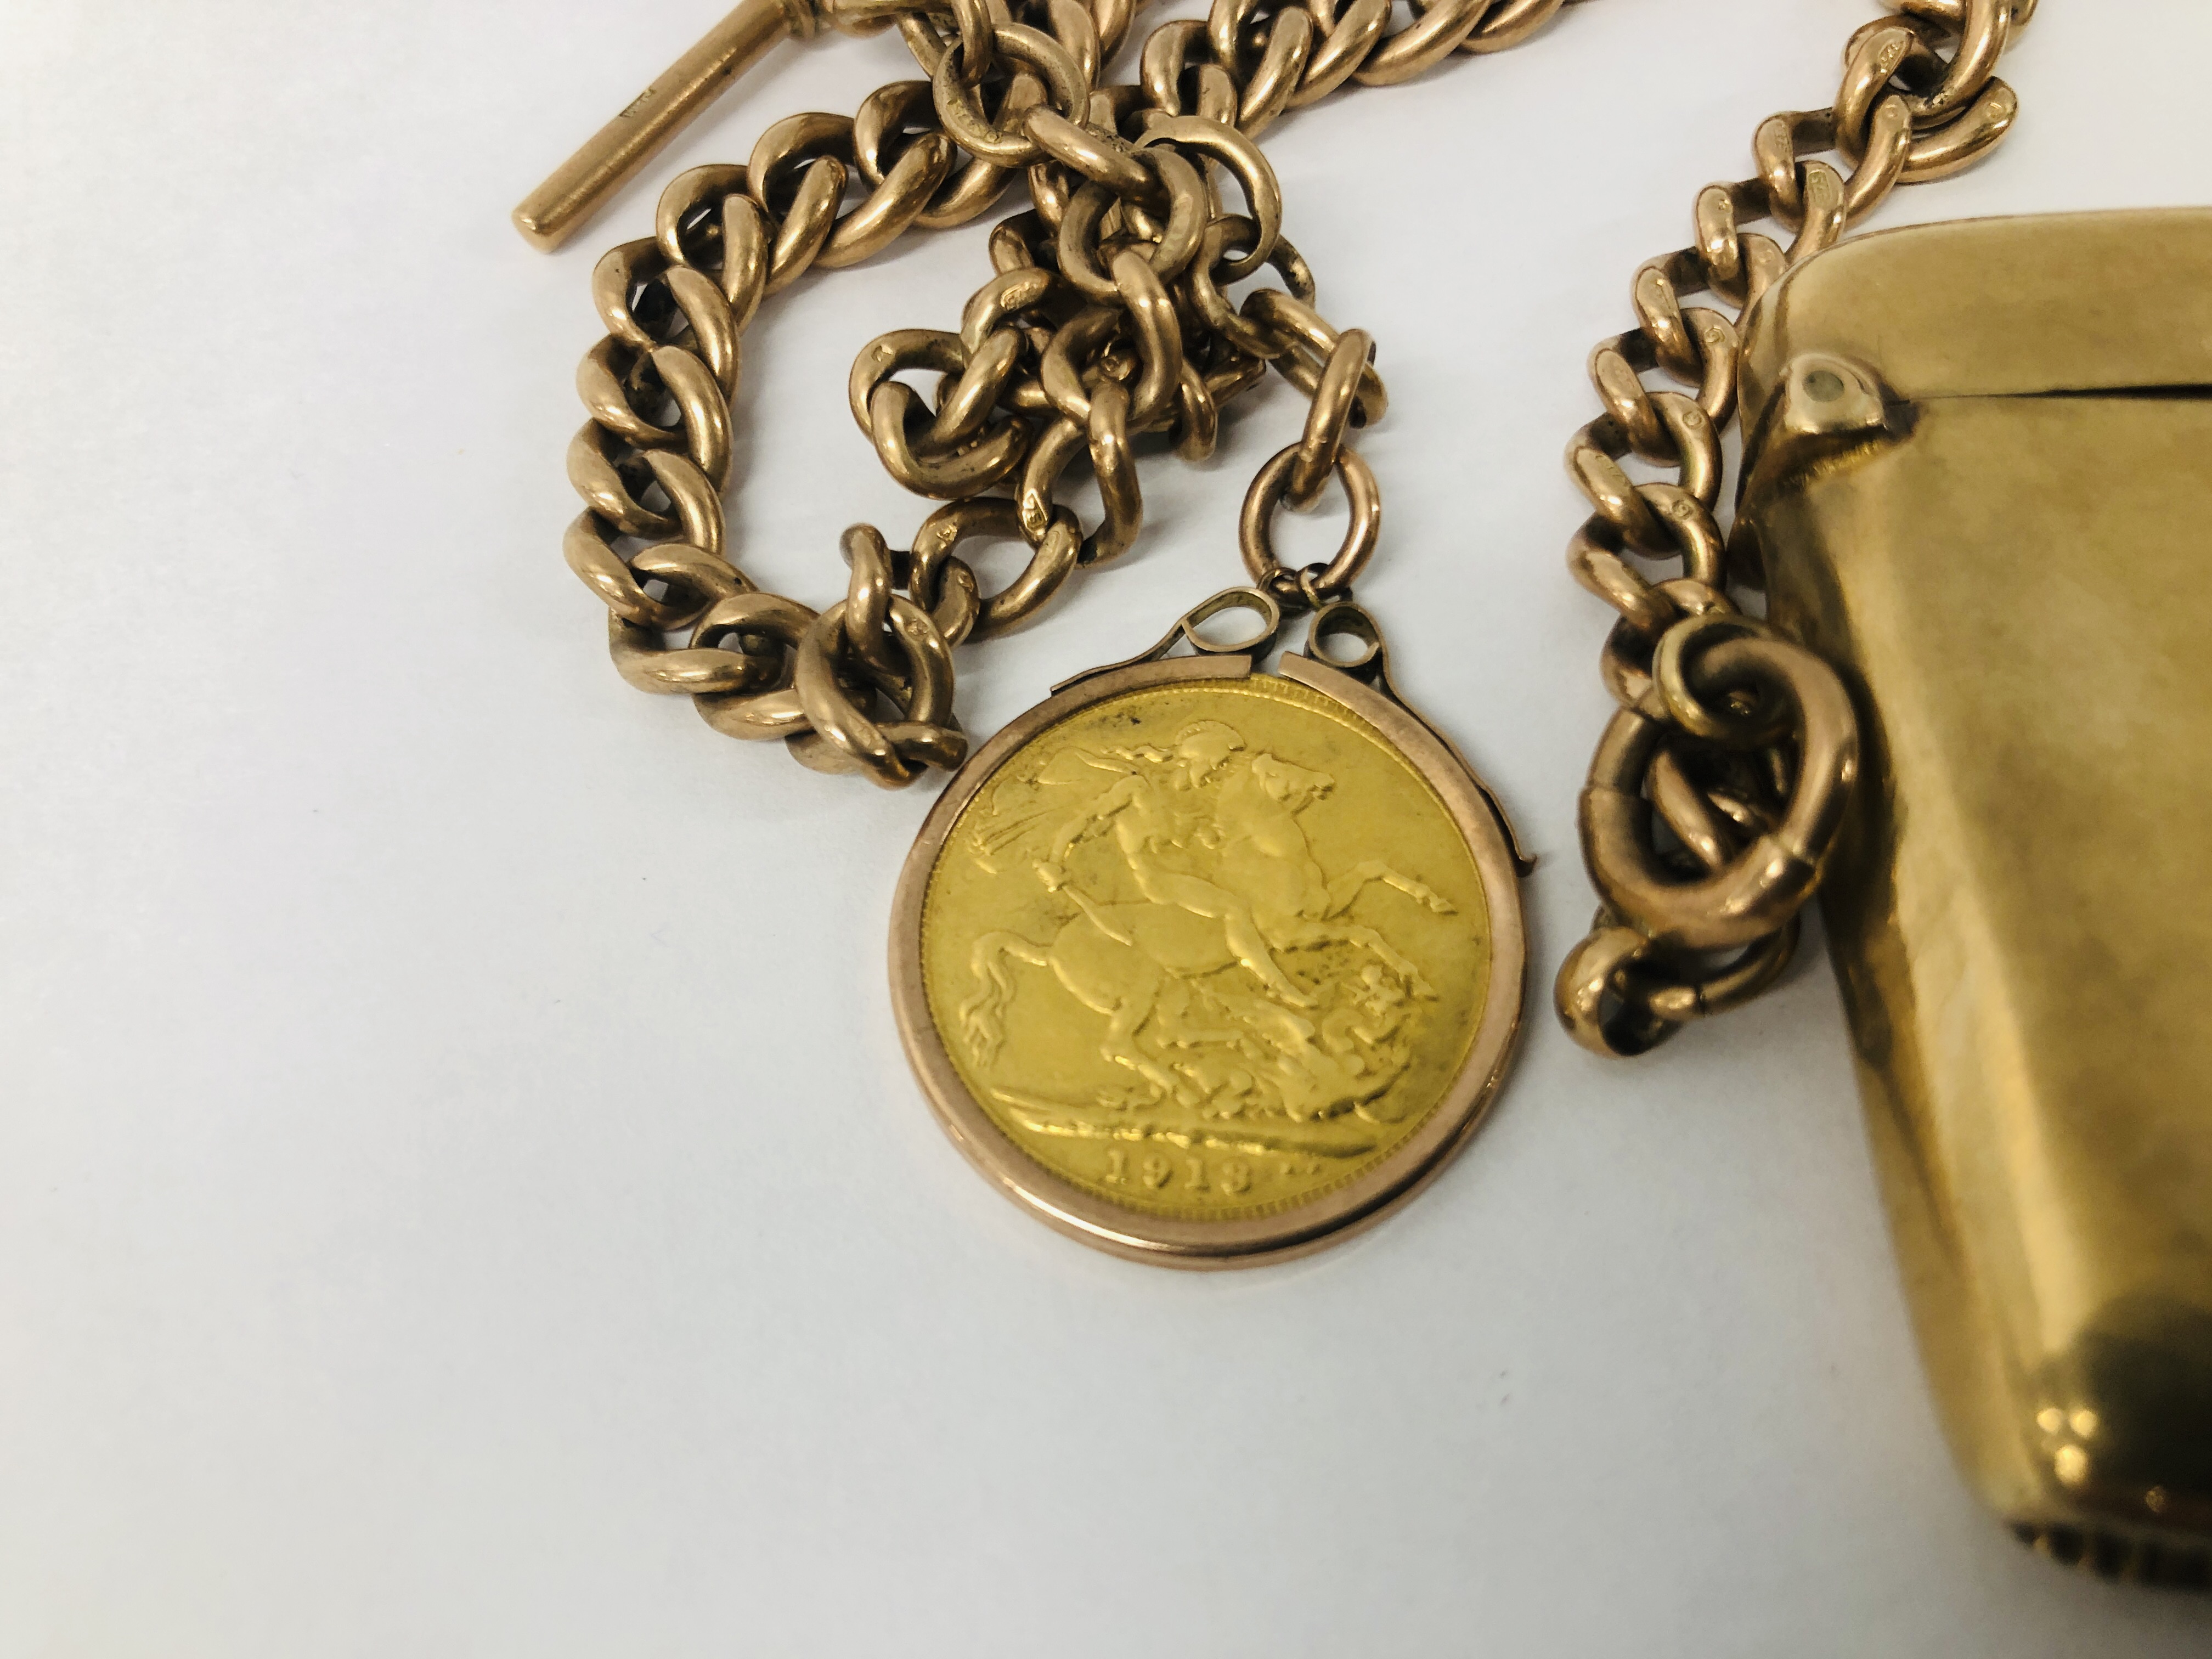 A WALTHAM GOLD PLATED POCKET WATCH ON 9CT GOLD WATCH CHAIN WITH A GEORGE V 1913 FULL SOVEREIGN COIN - Image 4 of 19